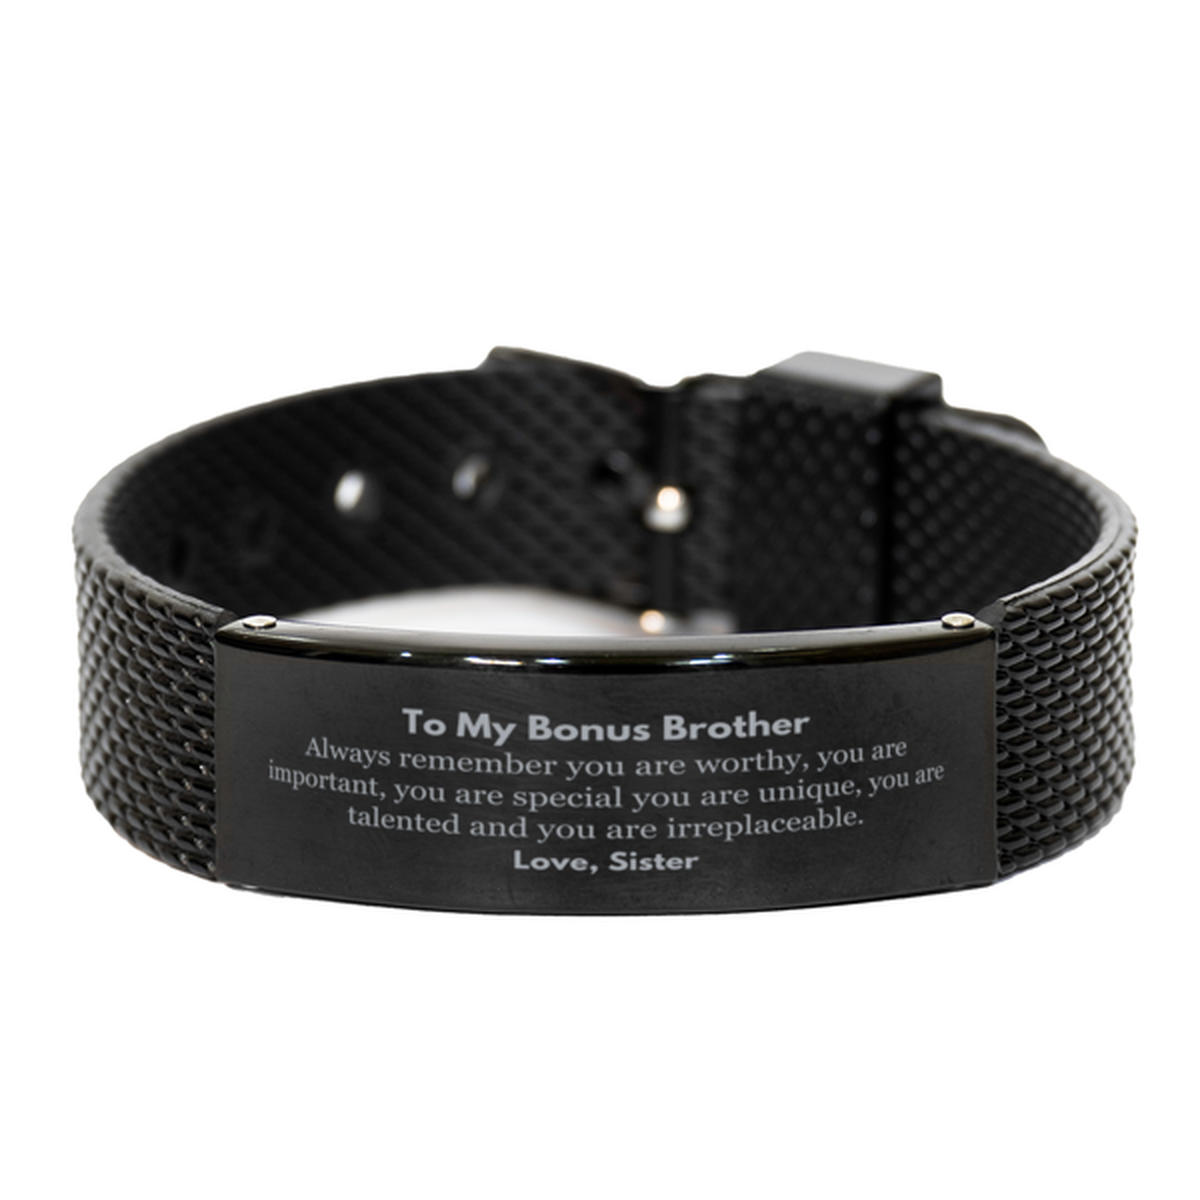 Bonus Brother Birthday Gifts from Sister, Inspirational Black Shark Mesh Bracelet for Bonus Brother Christmas Graduation Gifts for Bonus Brother Always remember you are worthy, you are important. Love, Sister